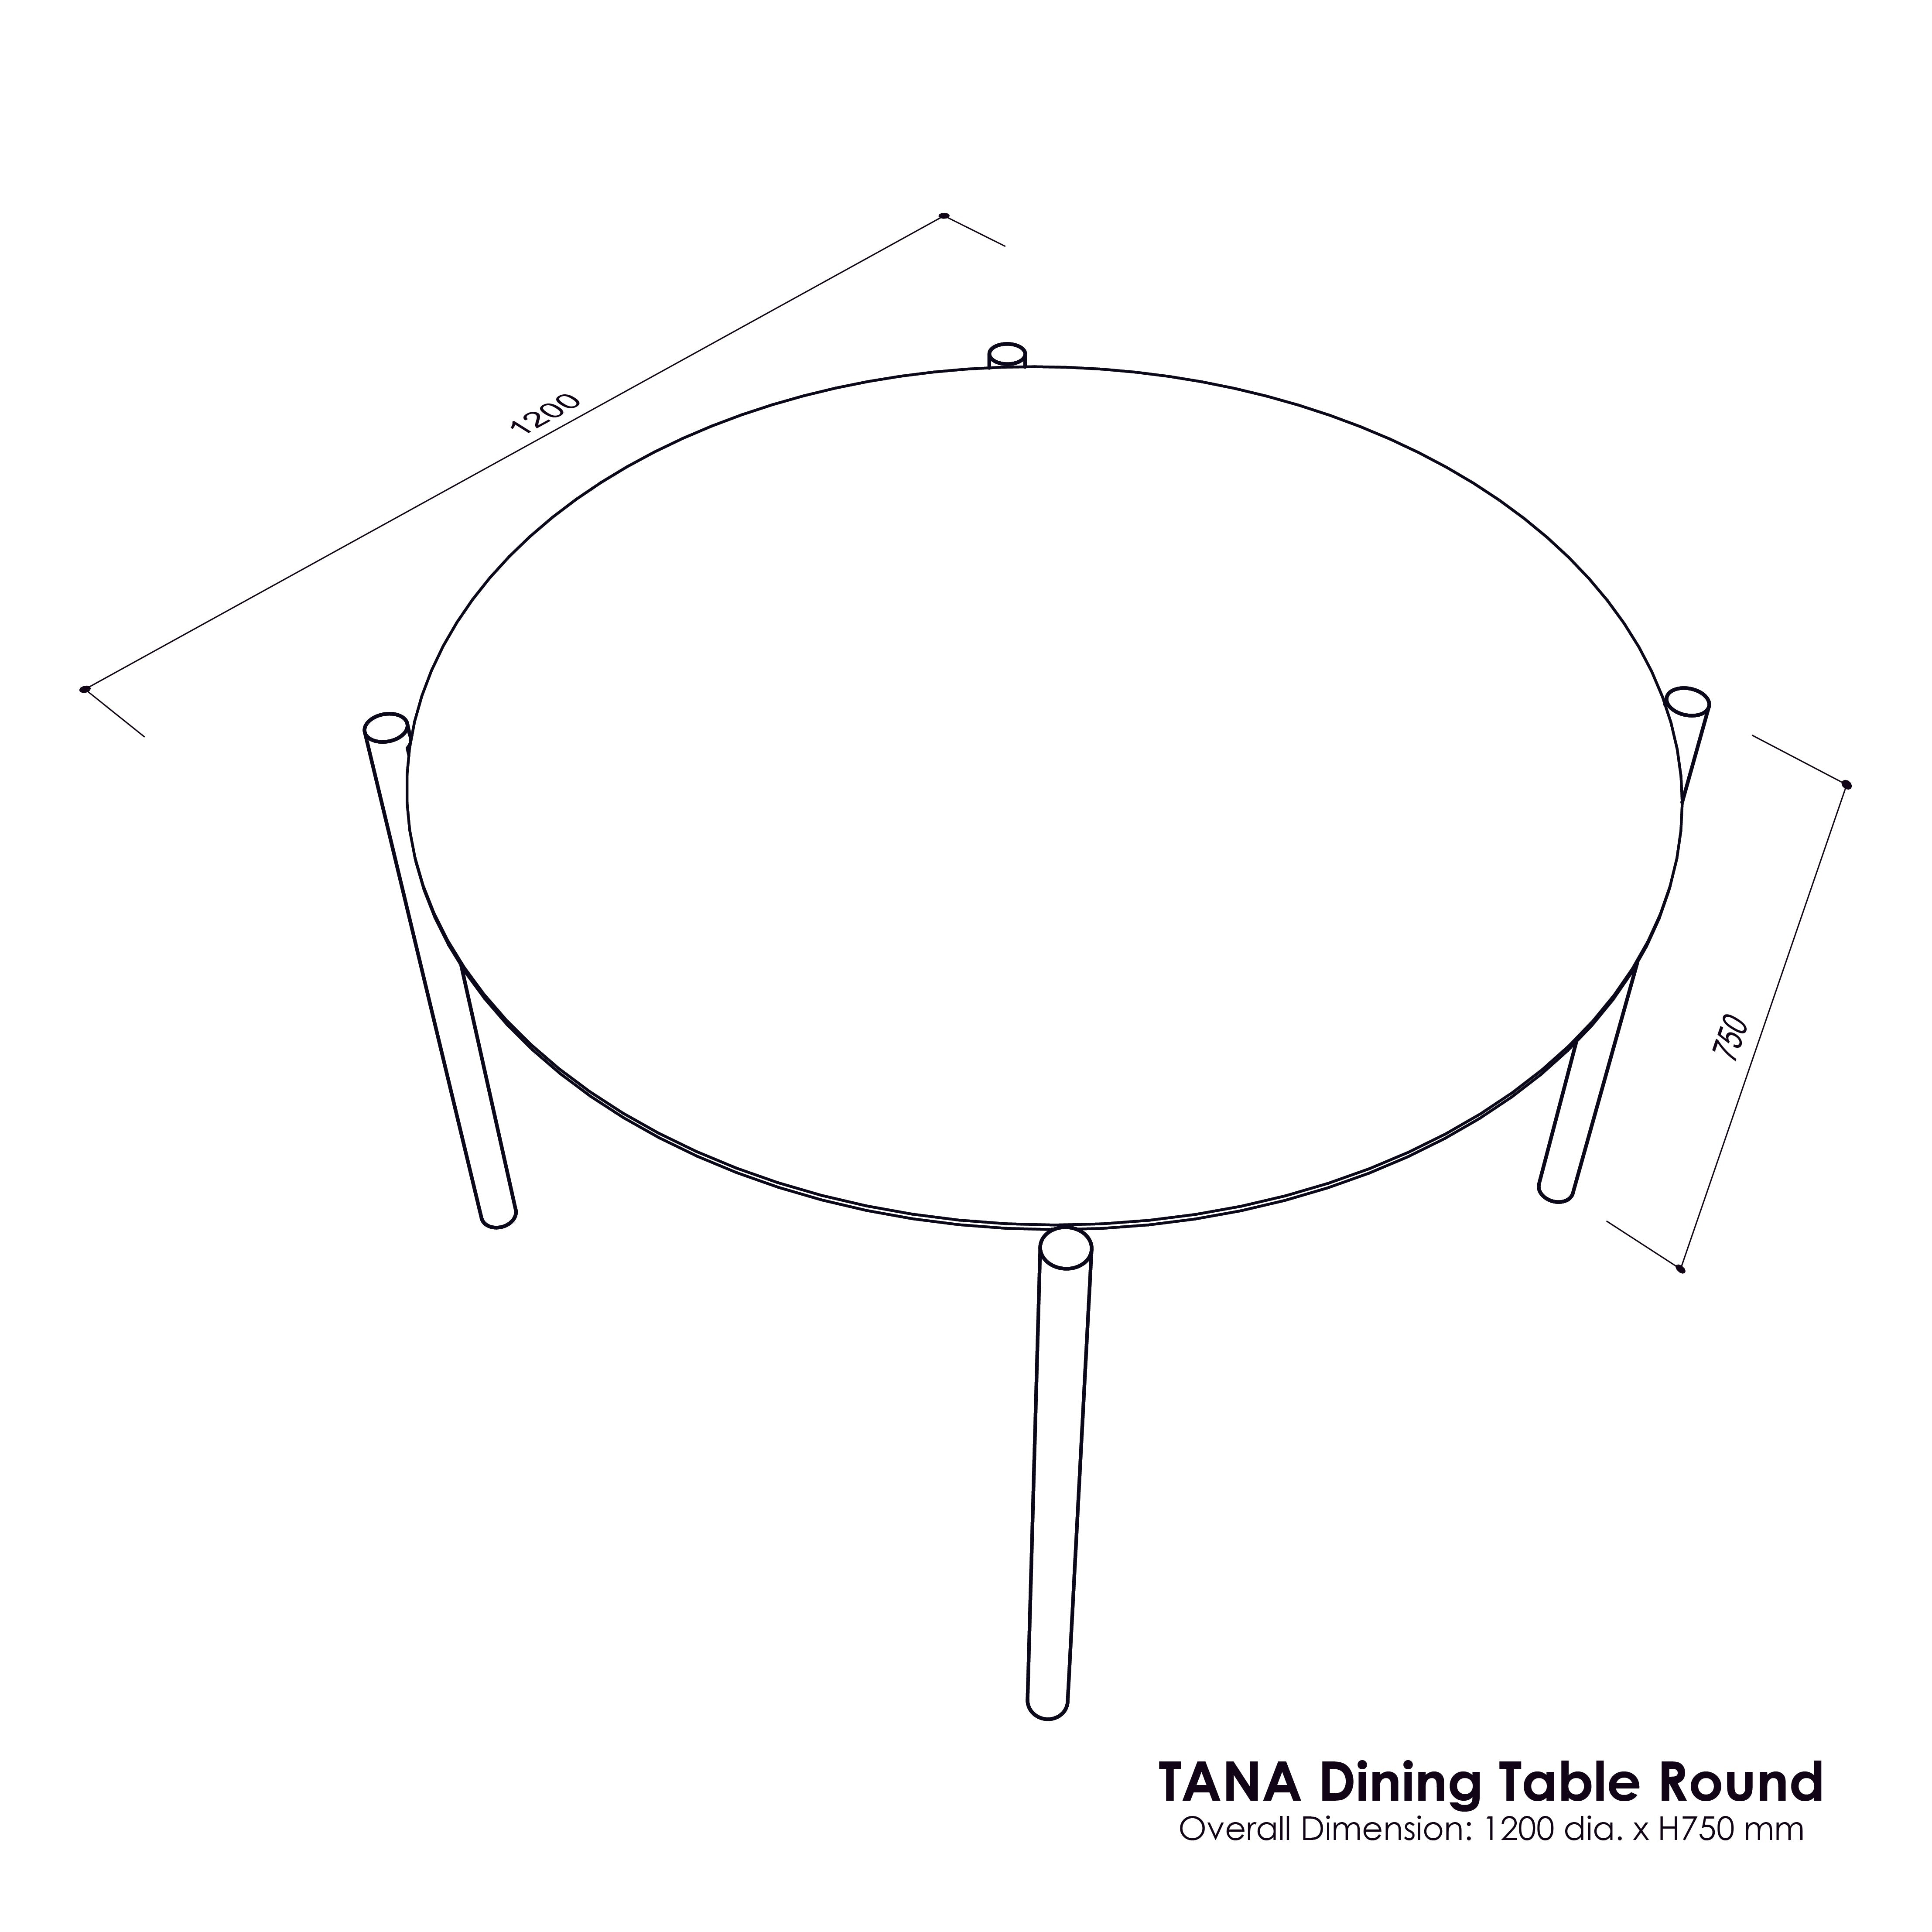 TANA Dining Table Round dia. 1200mm Oak MFC Top Exhibit Sales at Seremban 2 Offline Store